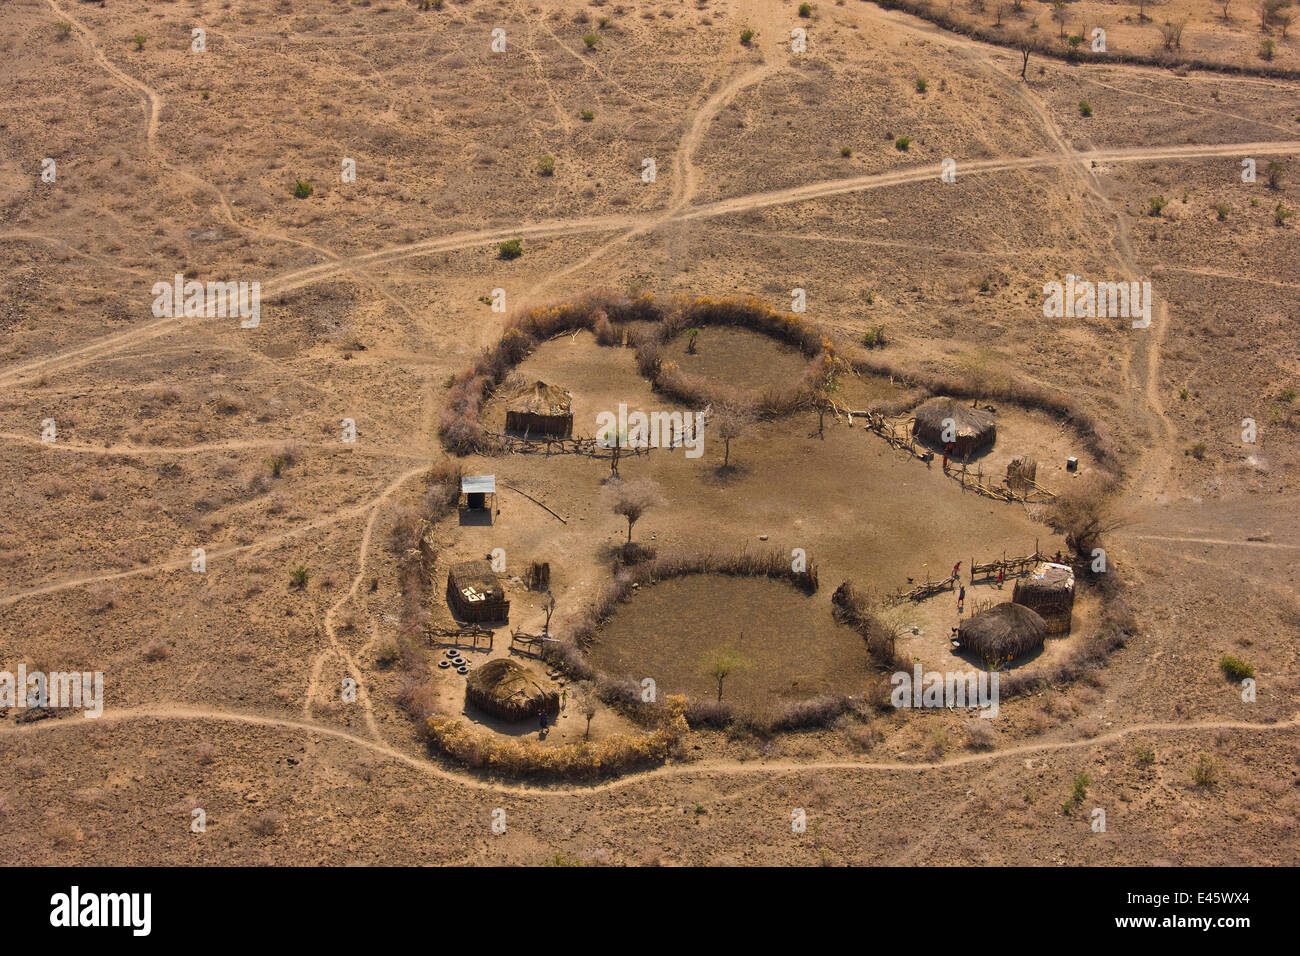 Aerial view of Maasai fenced homestead, with buildings and livestock enclosures. Kenya, Africa, August 2009 Stock Photo